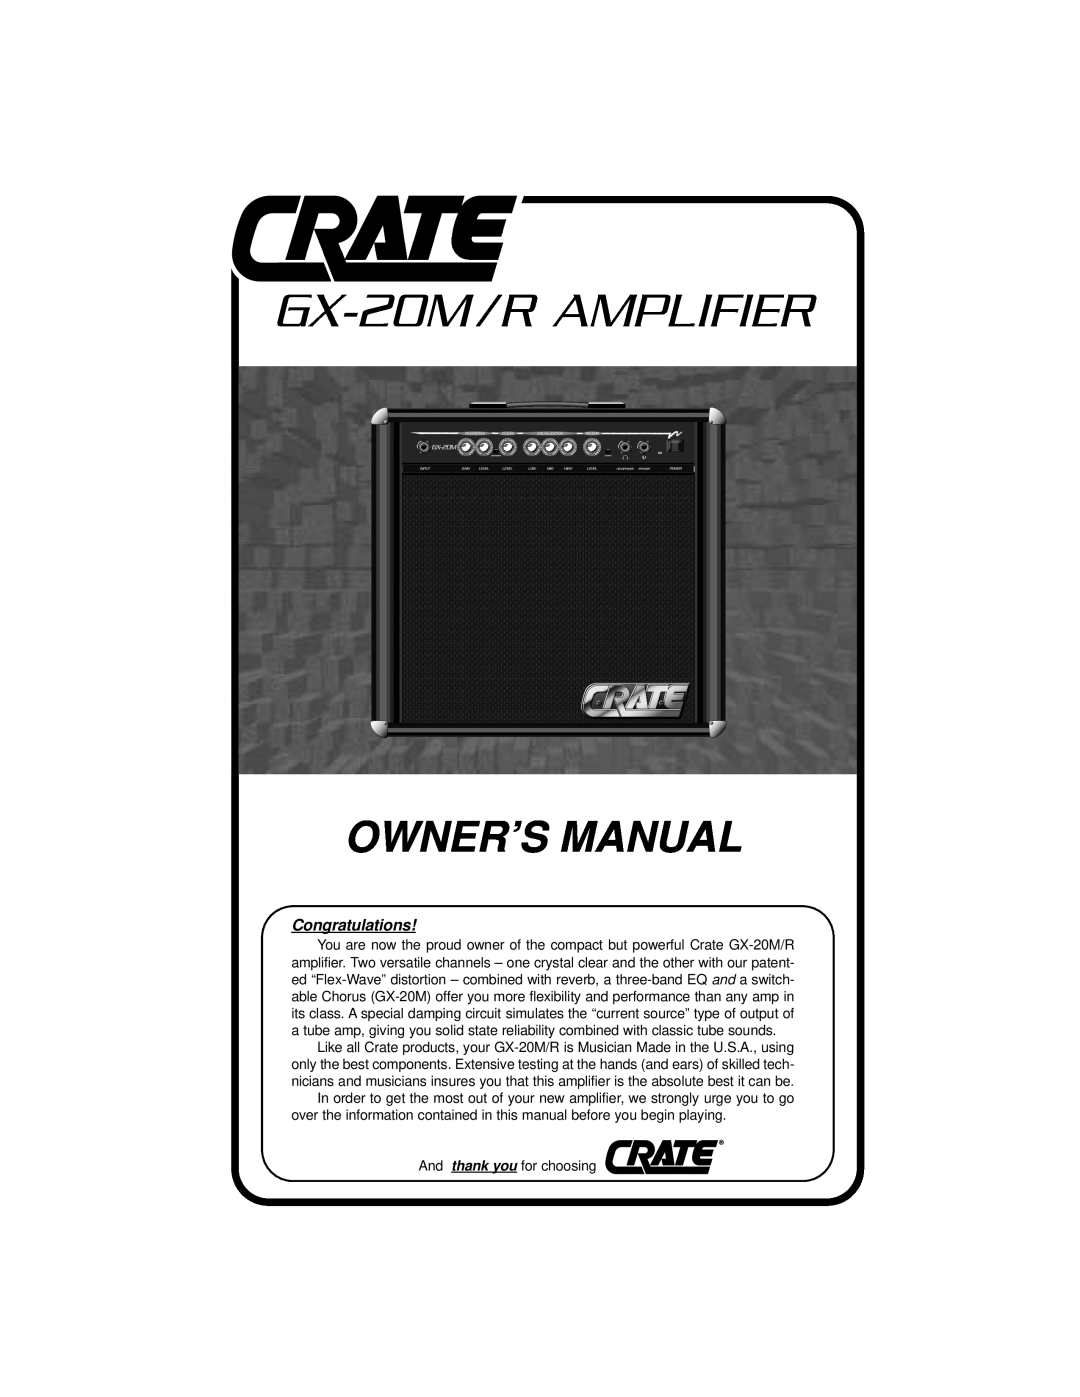 Crate Amplifiers owner manual Congratulations, GX-20M /R AMPLIFIER 